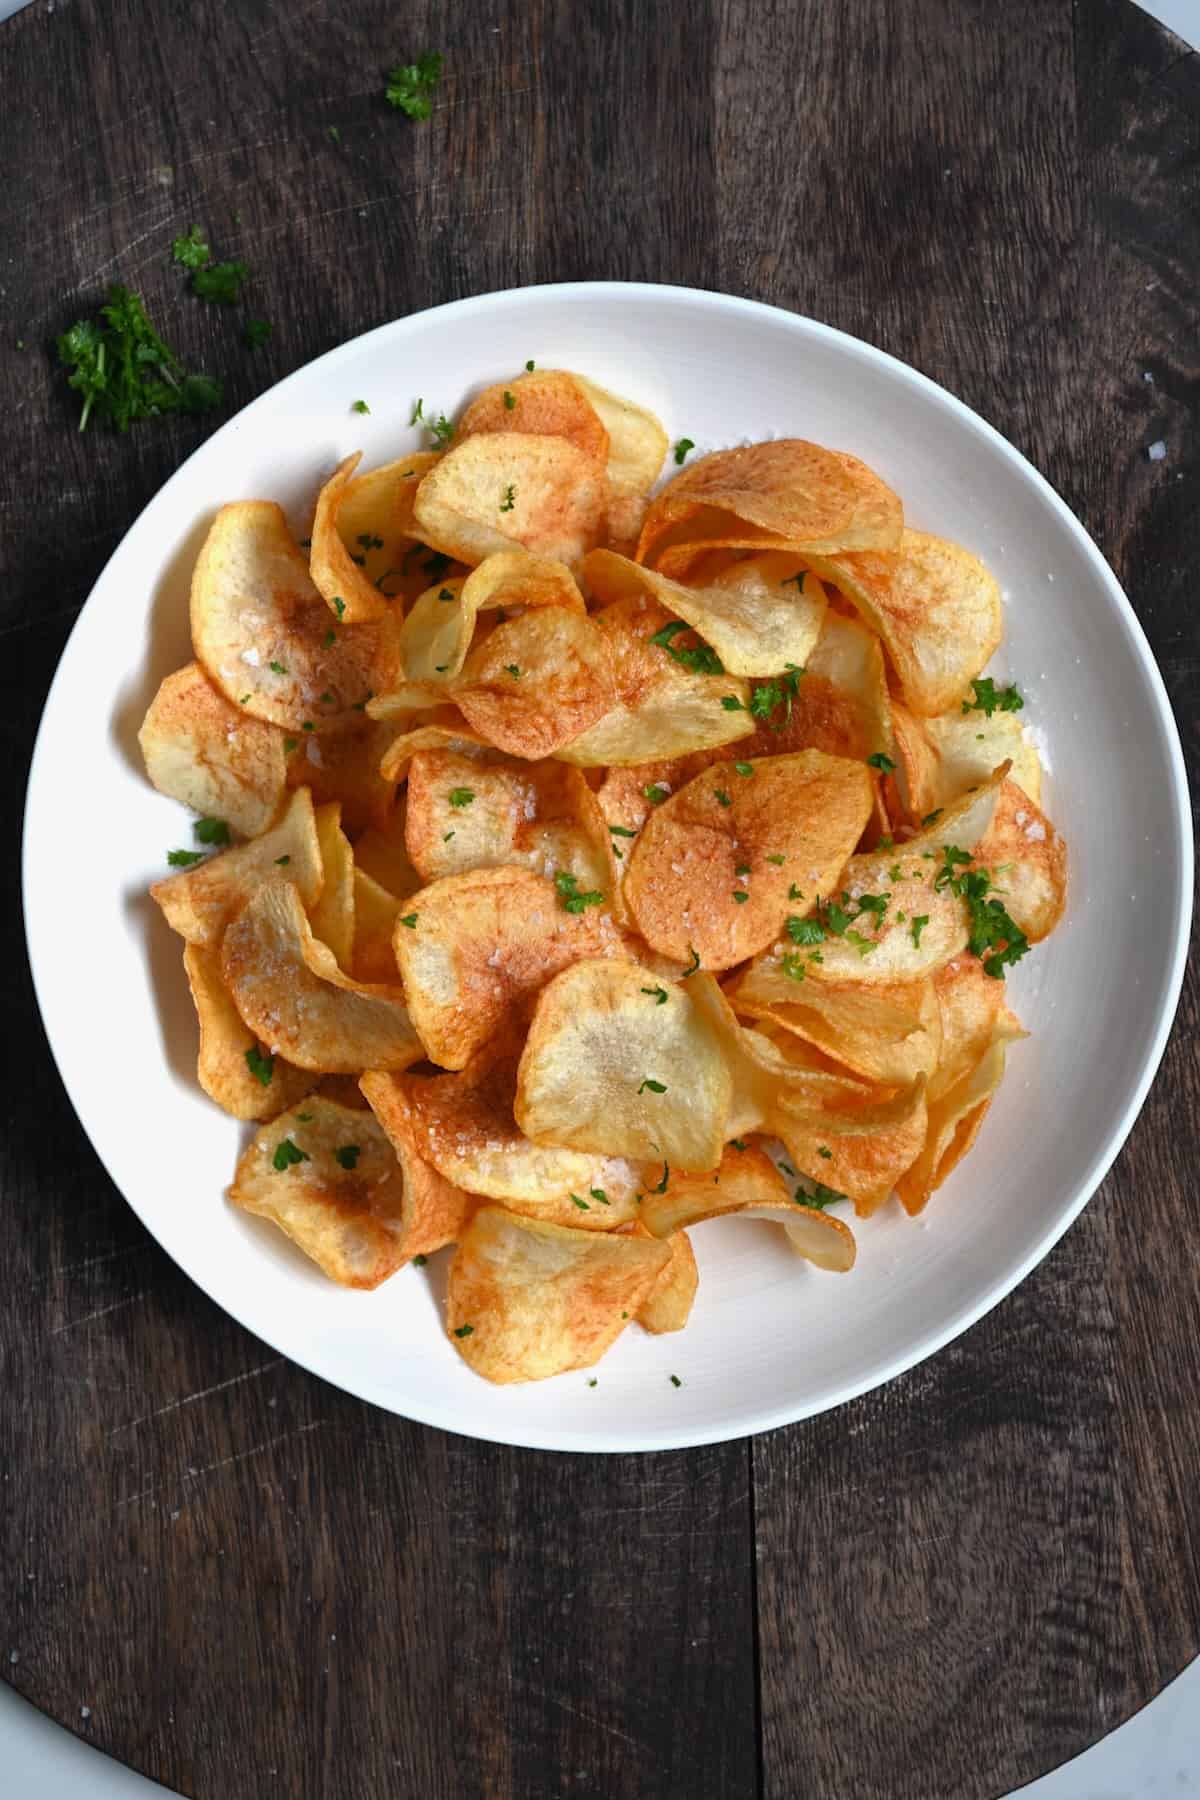 Homemade potato chips on a serving plate